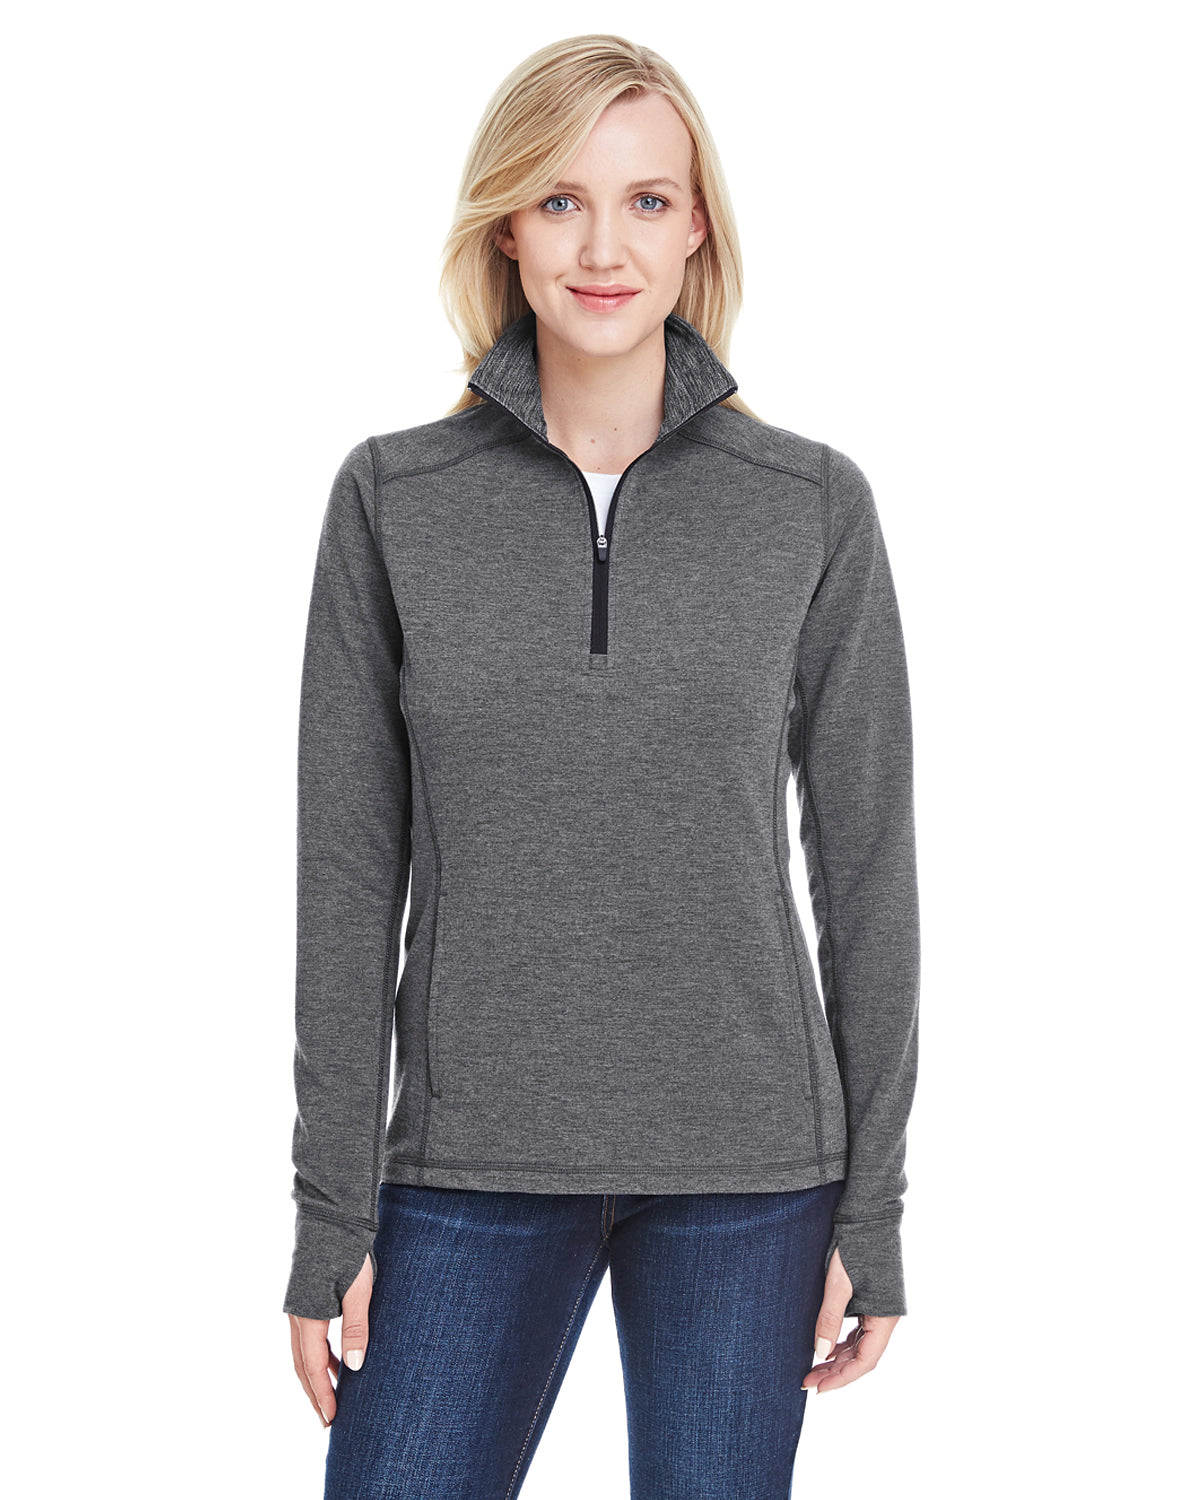 Beautifully Rooted Ladies' Omega Stretch Quarter-Zip